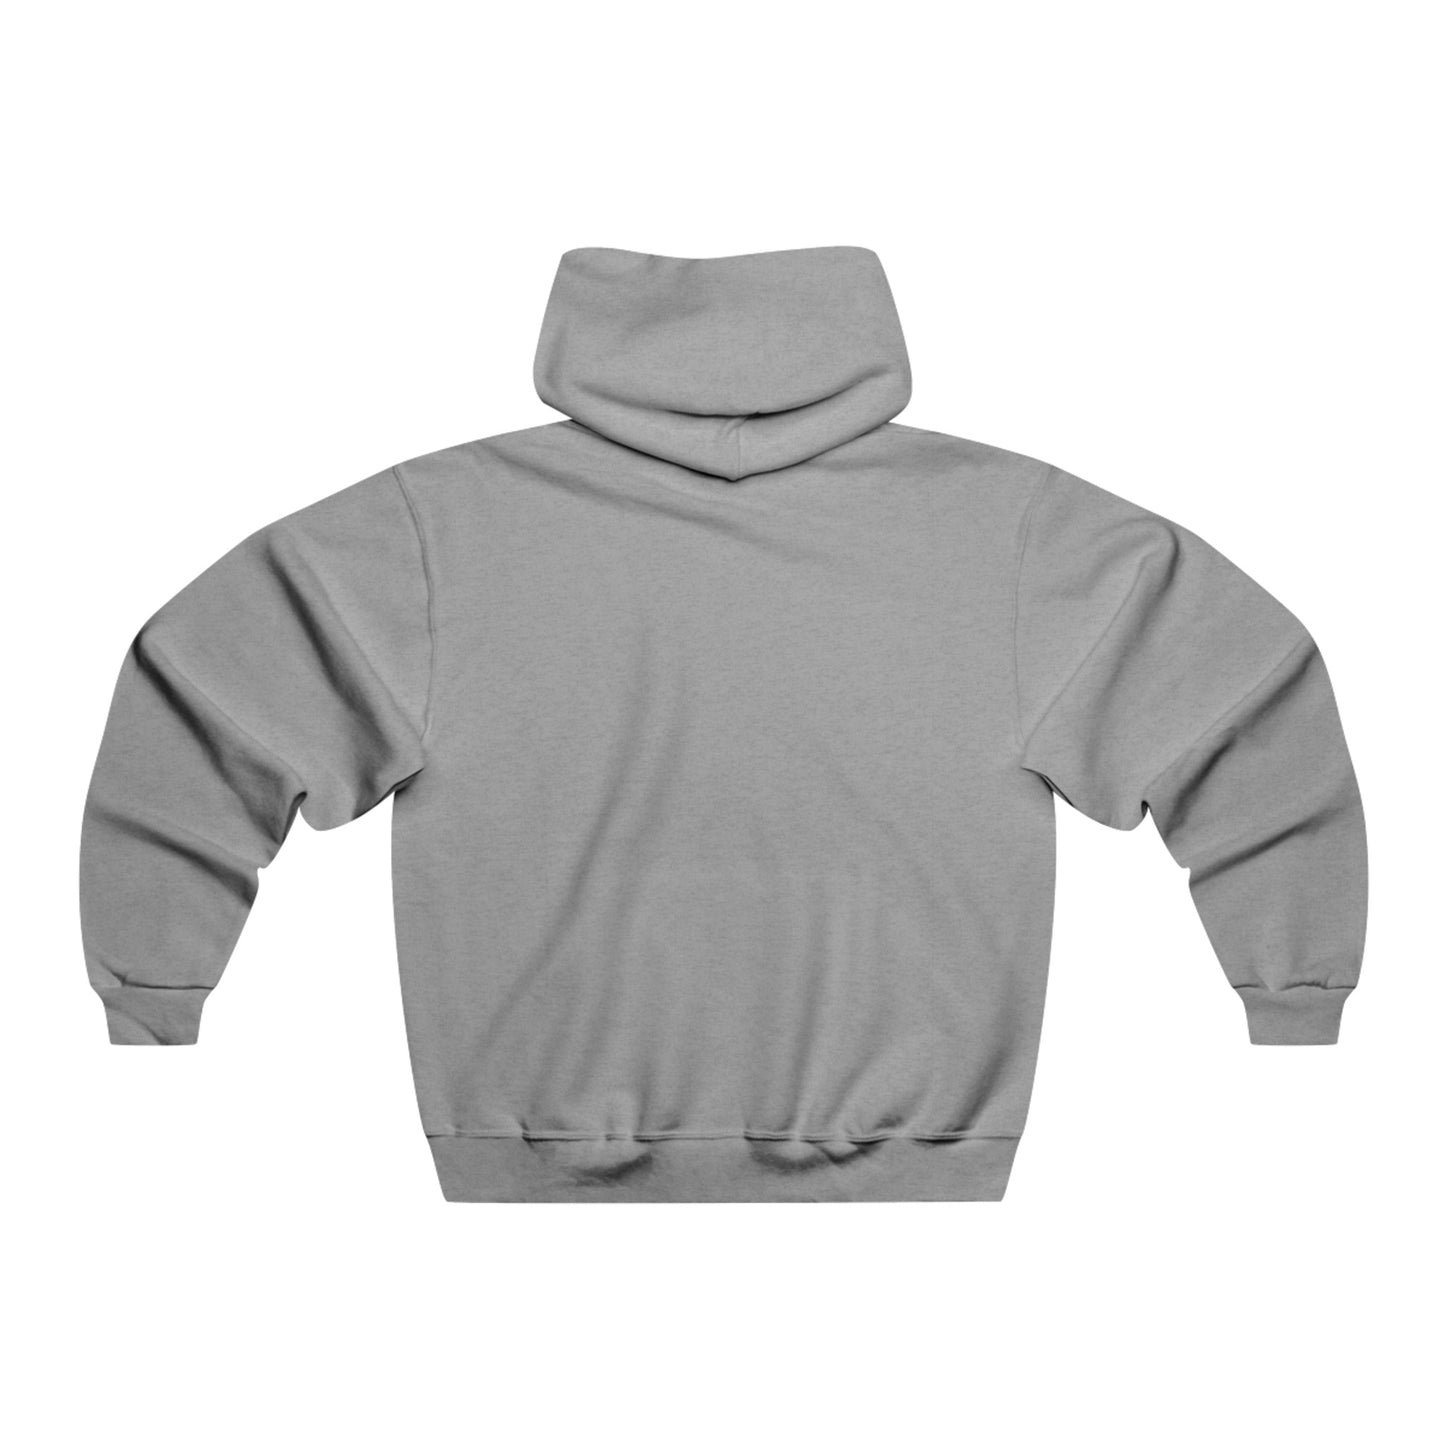 Baseline Clothing Co Catcher's Mask hoodie